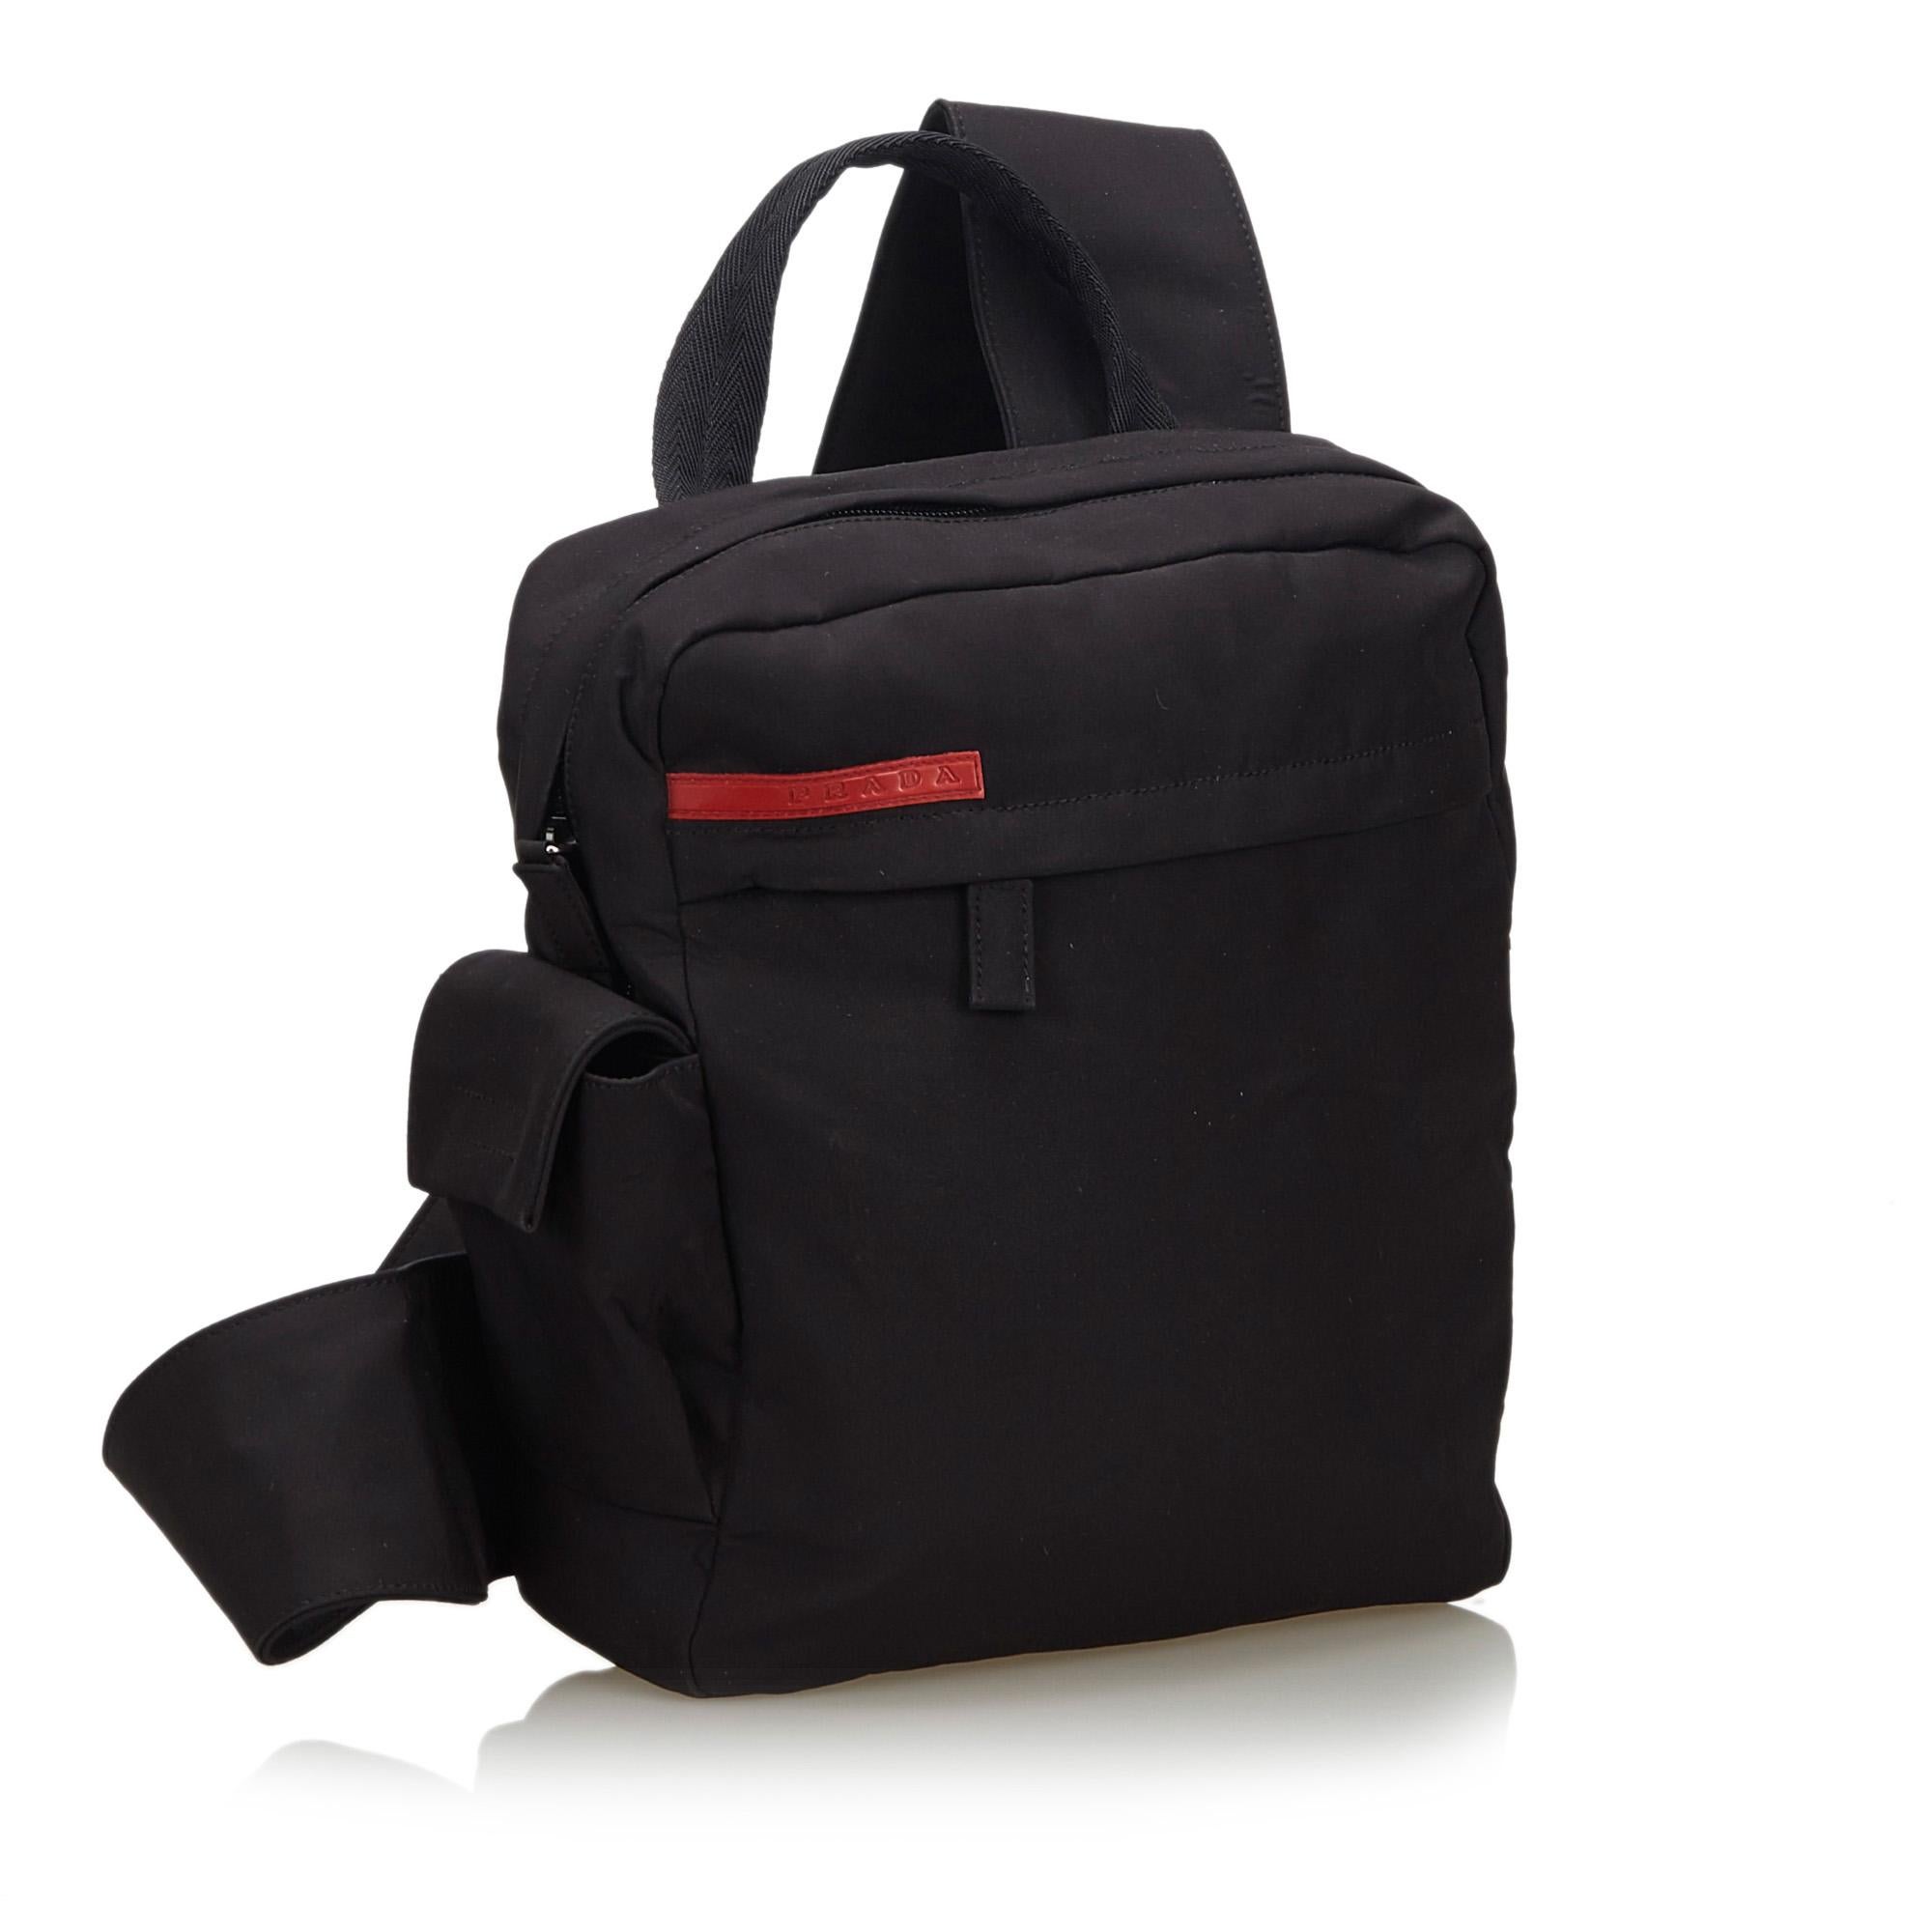 This backpack features a nylon body, flat top handle, flat back strap, top zip closure, exterior zip and flap pockets, and interior zip pocket. It carries as AB condition rating.

Inclusions: 
This item does not come with